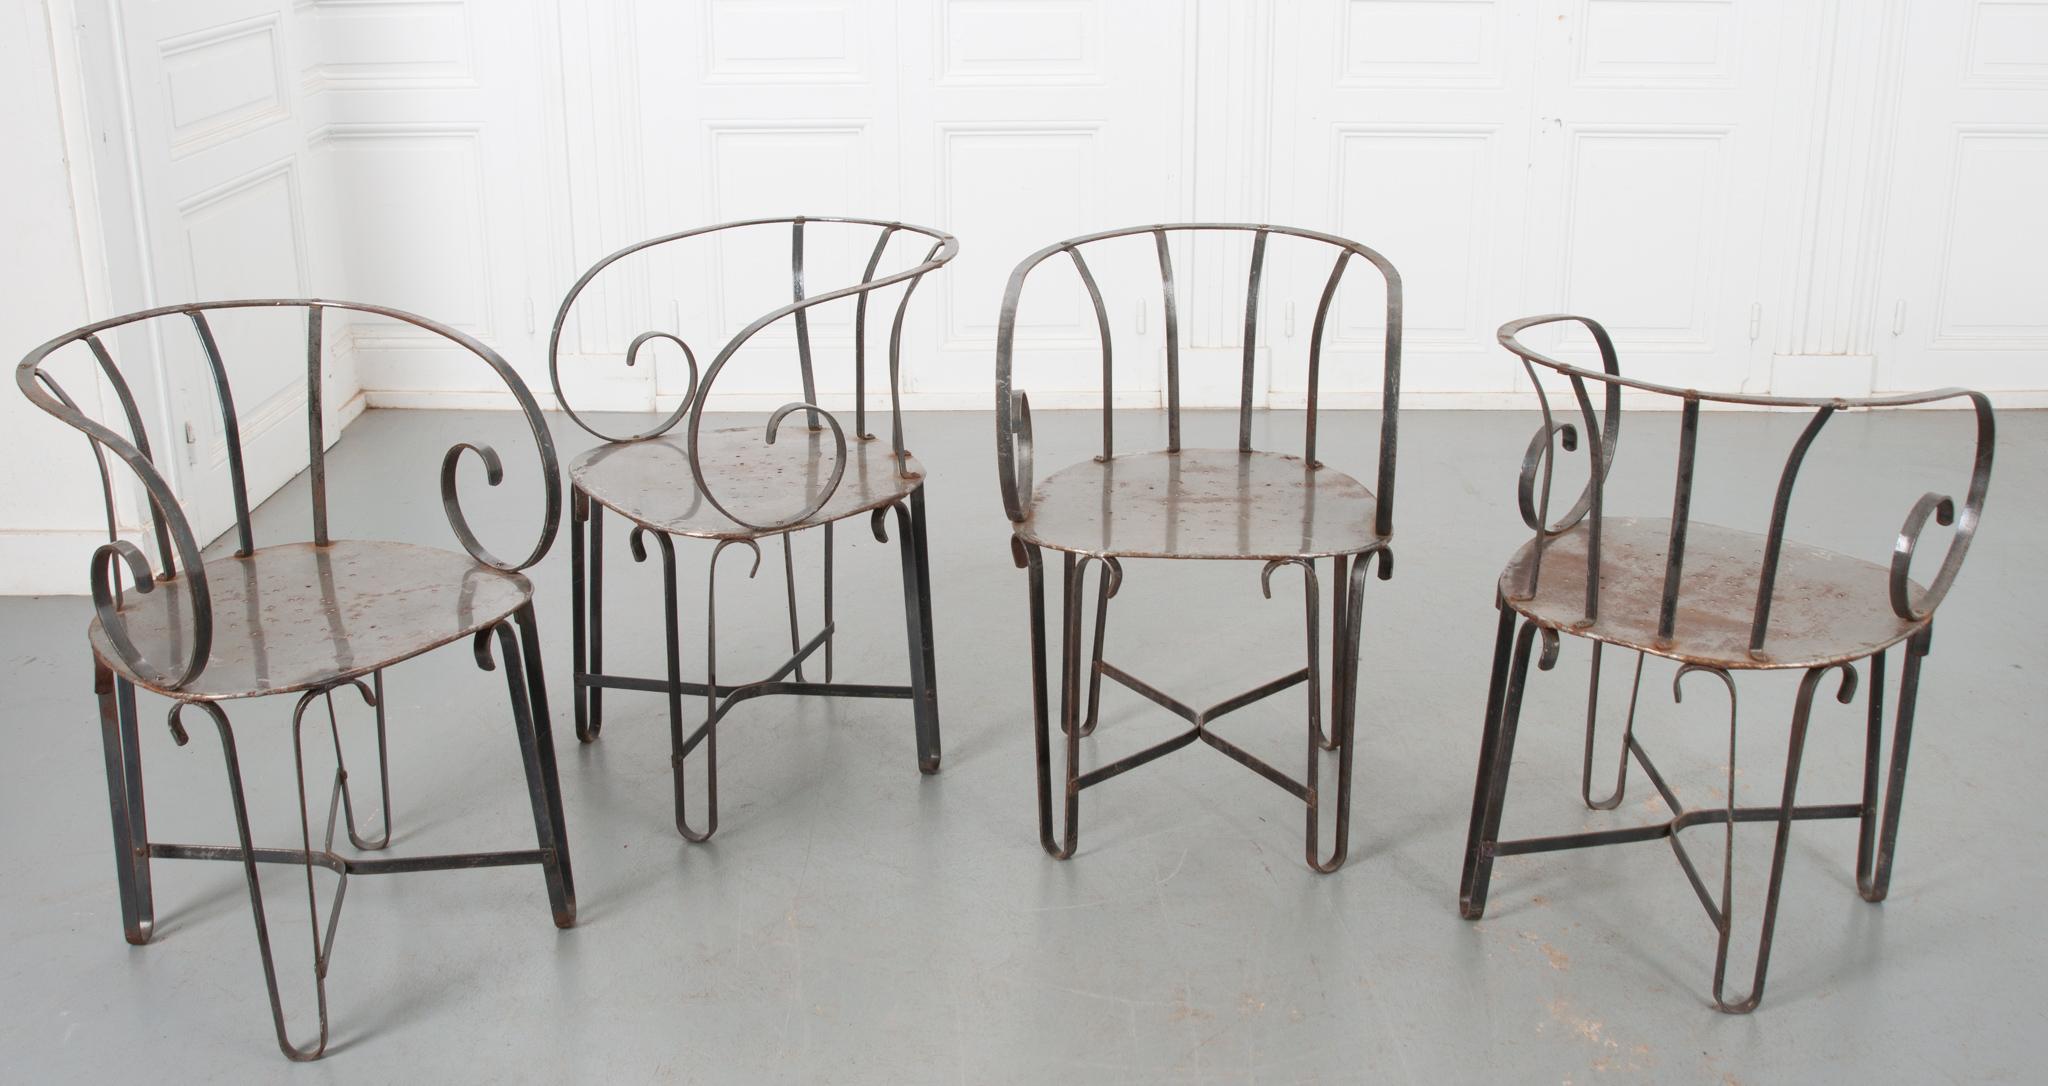 A very attractive set of four chairs from France with a mid-century design. Scrolling arms and shaped backs attach to a wide, flat seat. A pierced design of a six point star on the seat bottoms add a whimsical touch to these sturdy chairs.